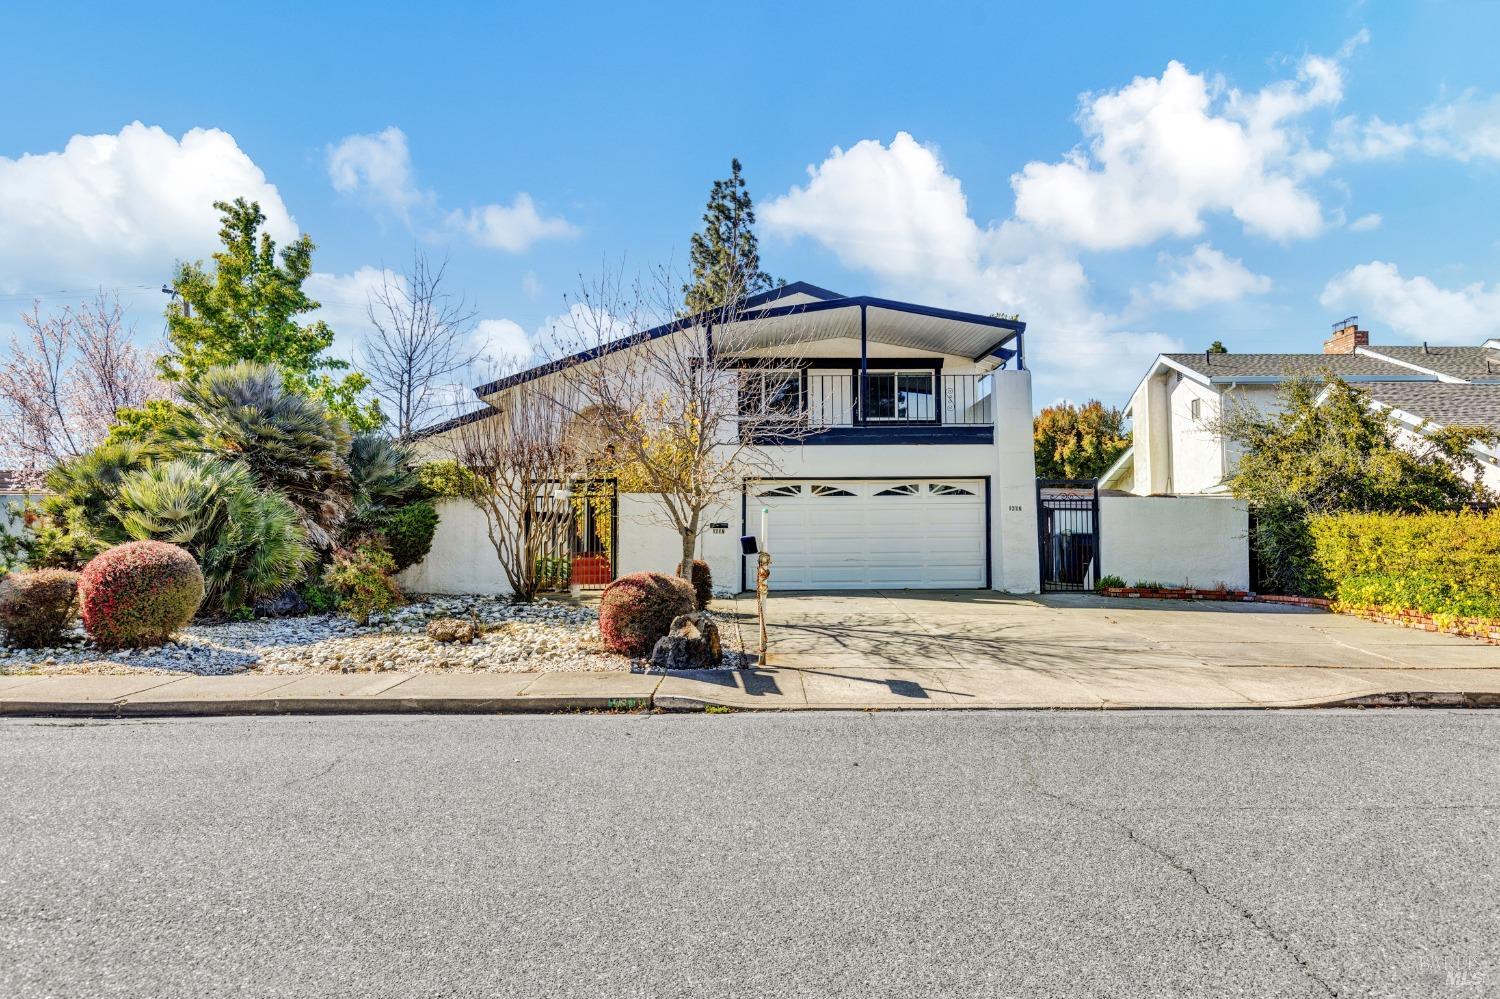 Photo of 1607 Richards Ct in Fairfield, CA